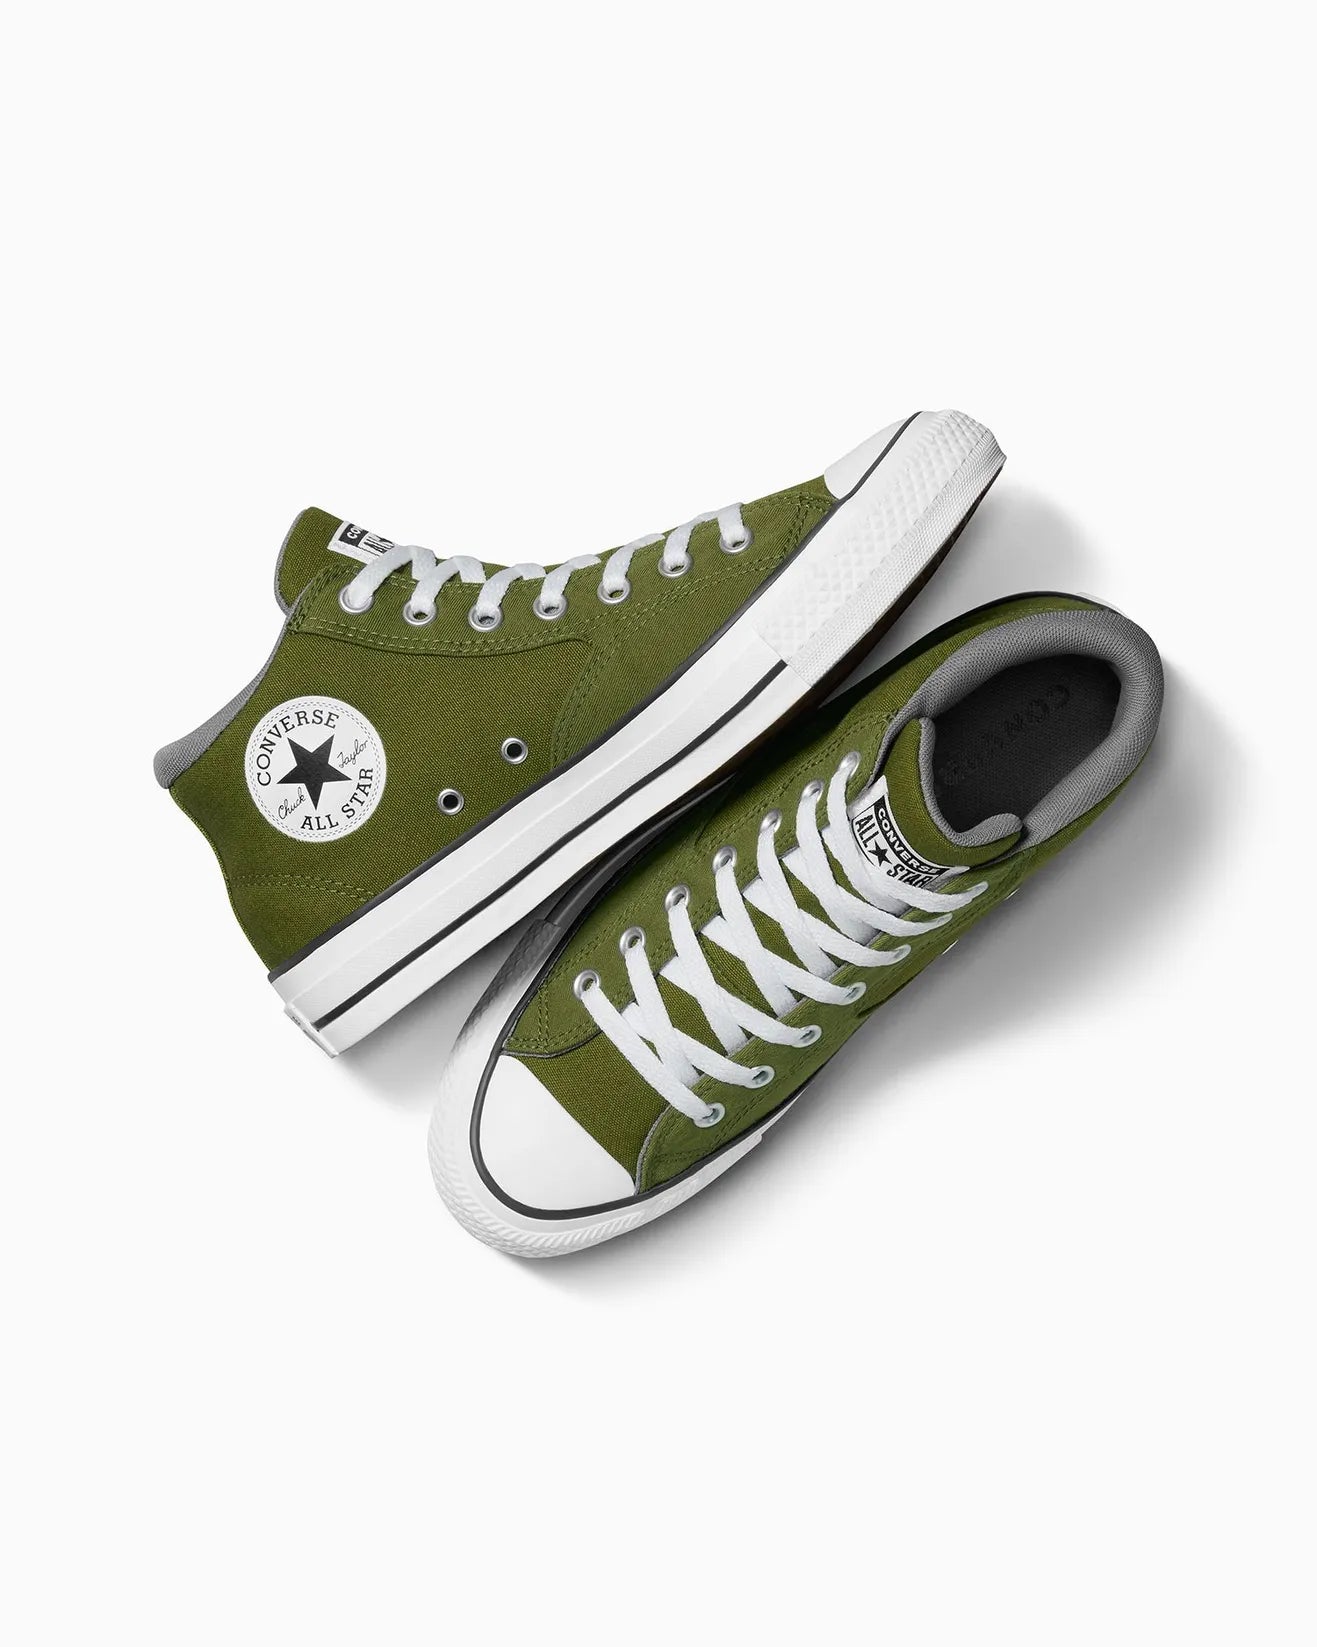 CONVERSE CHUCK TAYLOR ALL STAR Malden Street Crafted Patchwork Mid - TROLLED/WHITE/BLACK